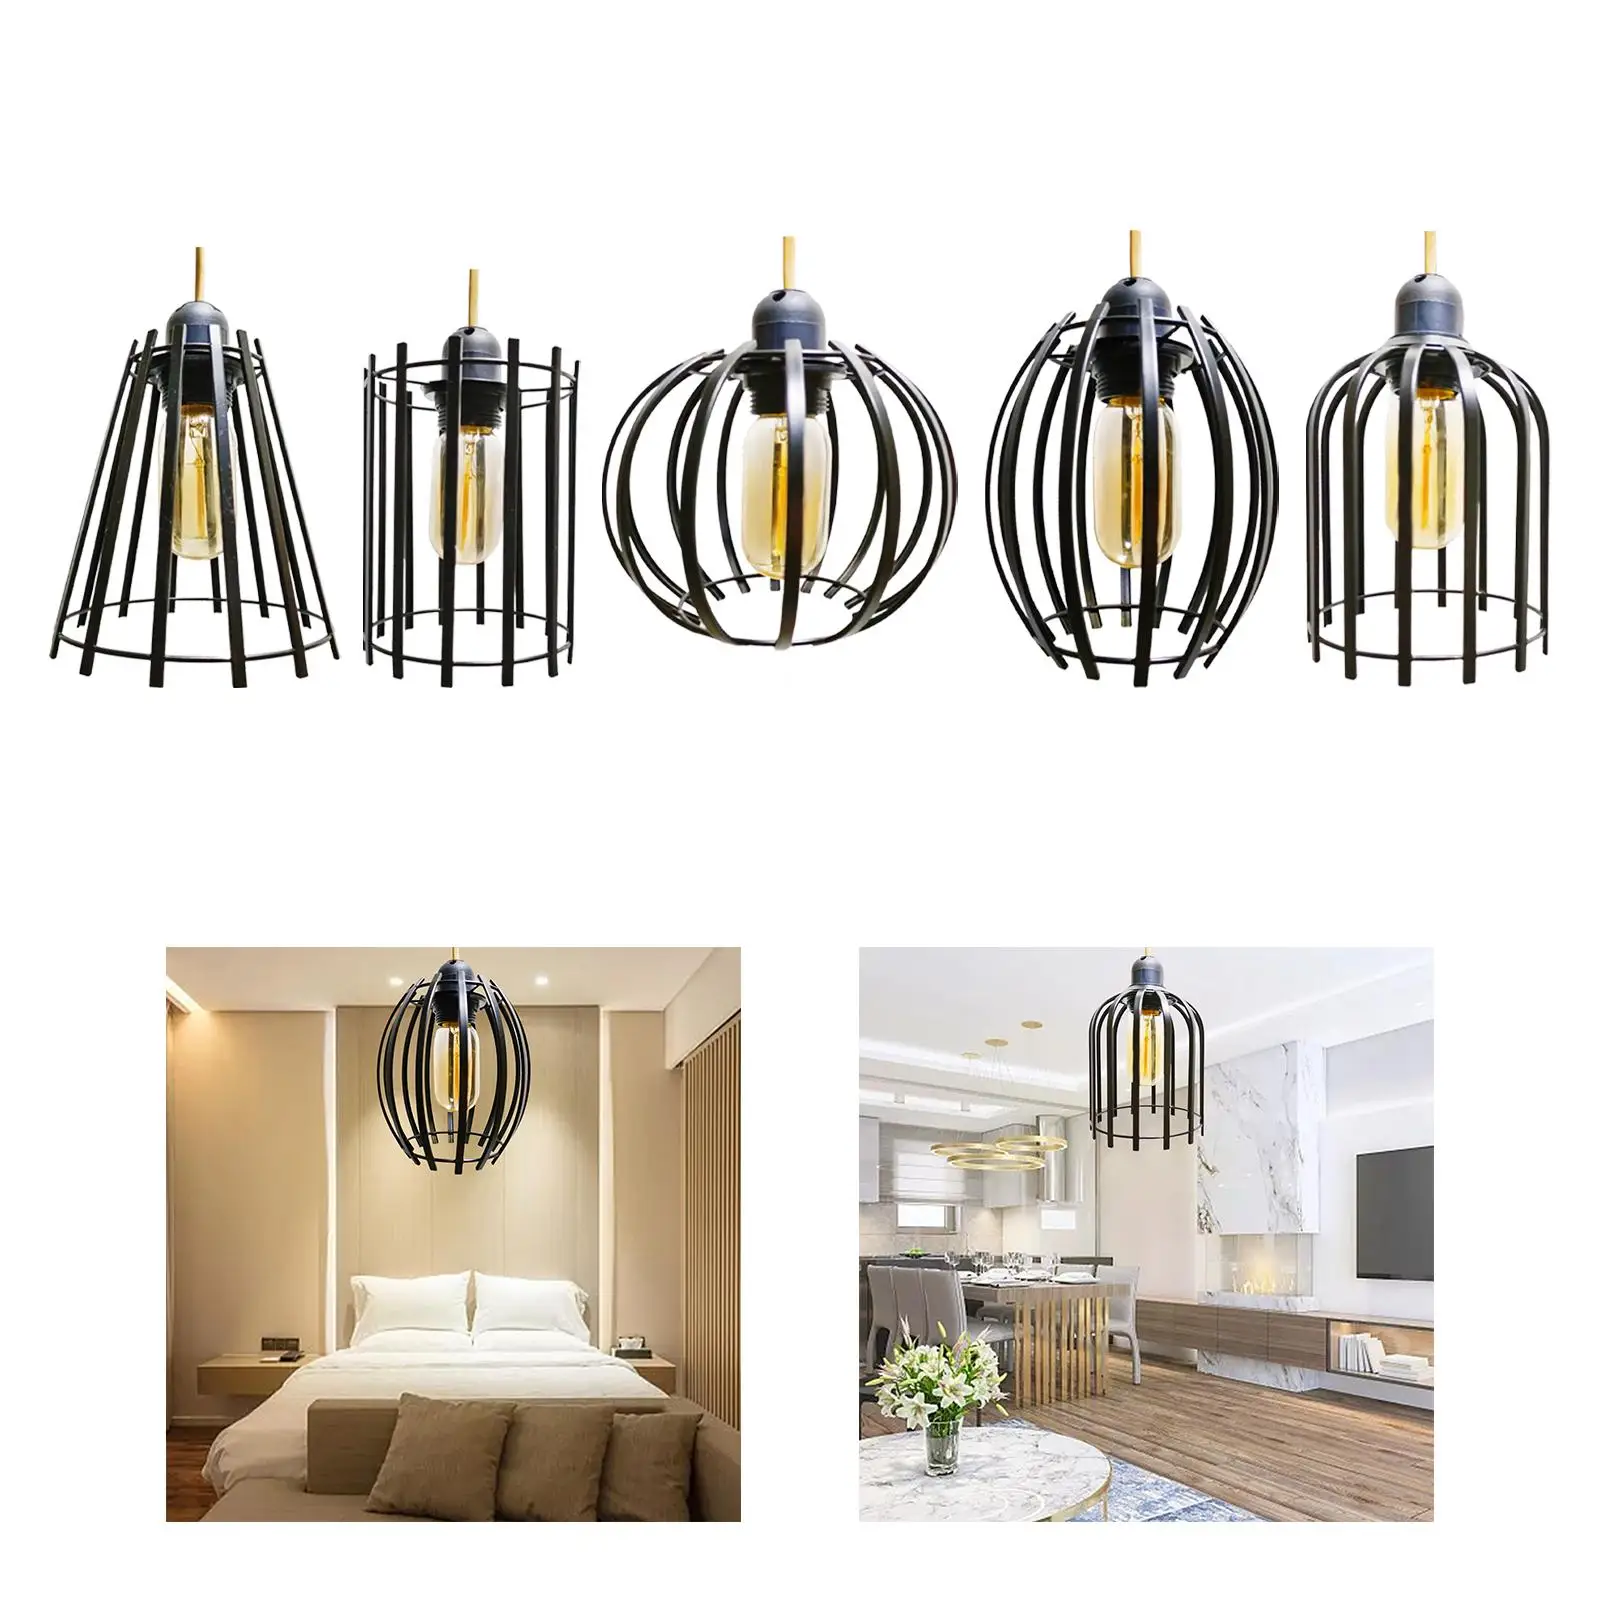 Iron Pendant Lamp Shade Simple Pendant Light Shade Light Bulb Cage Lamp Cover for Restaurant Kitchen Dining Room Hotel Bedroom